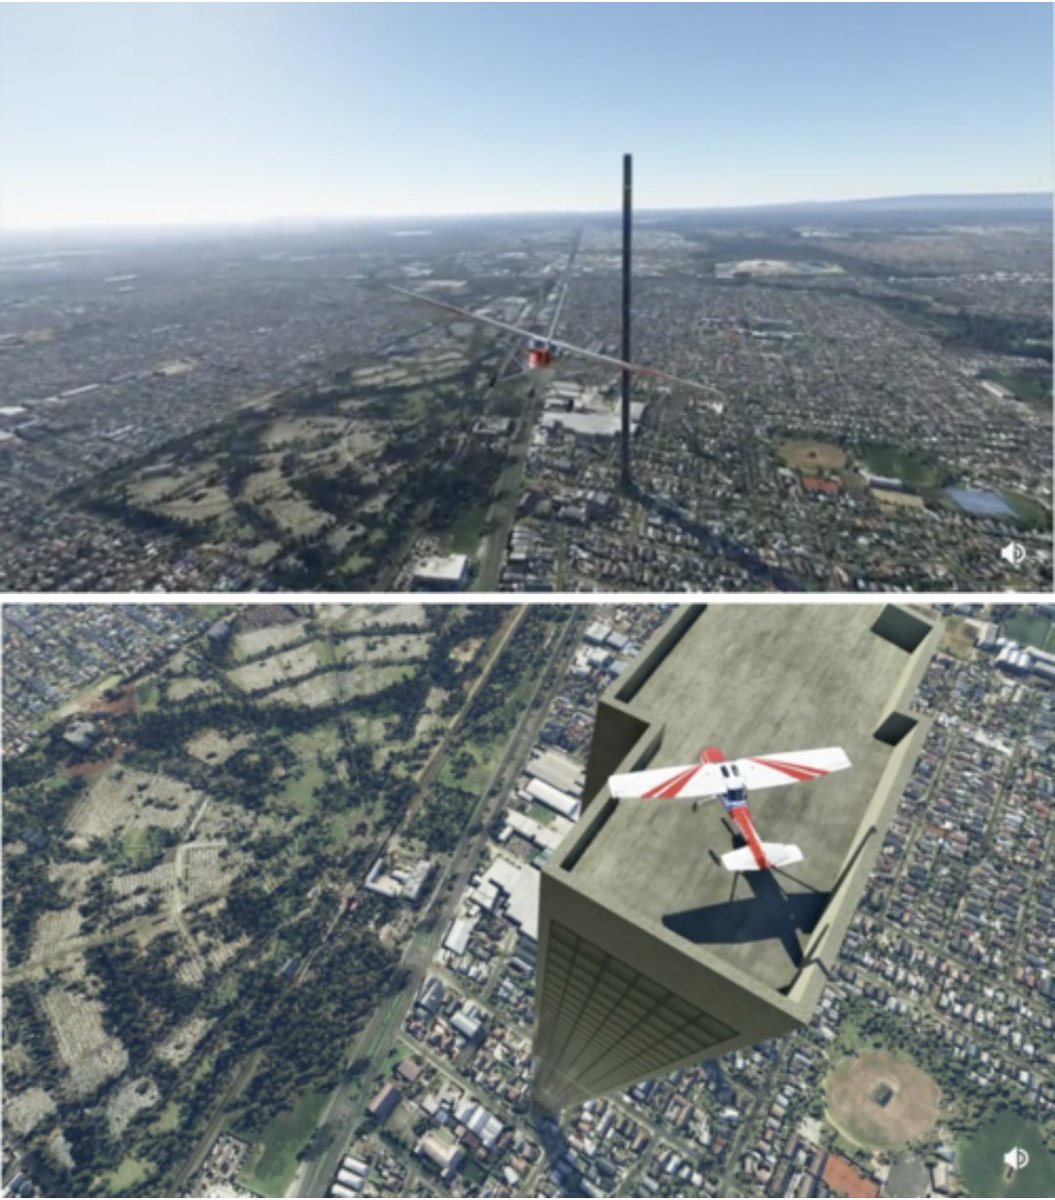 The Melbourne Monolith is now MSFS2020's most famous landmark. People are hurrying to complete the Monolith Challenge, a successful landing on the roof of the 212-story glitch, before it's patched out of existence. #AllHailTheMonolith(images: fulltimespy) https://aiweirdness.com/post/627344542828544000/planet-earth-from-above